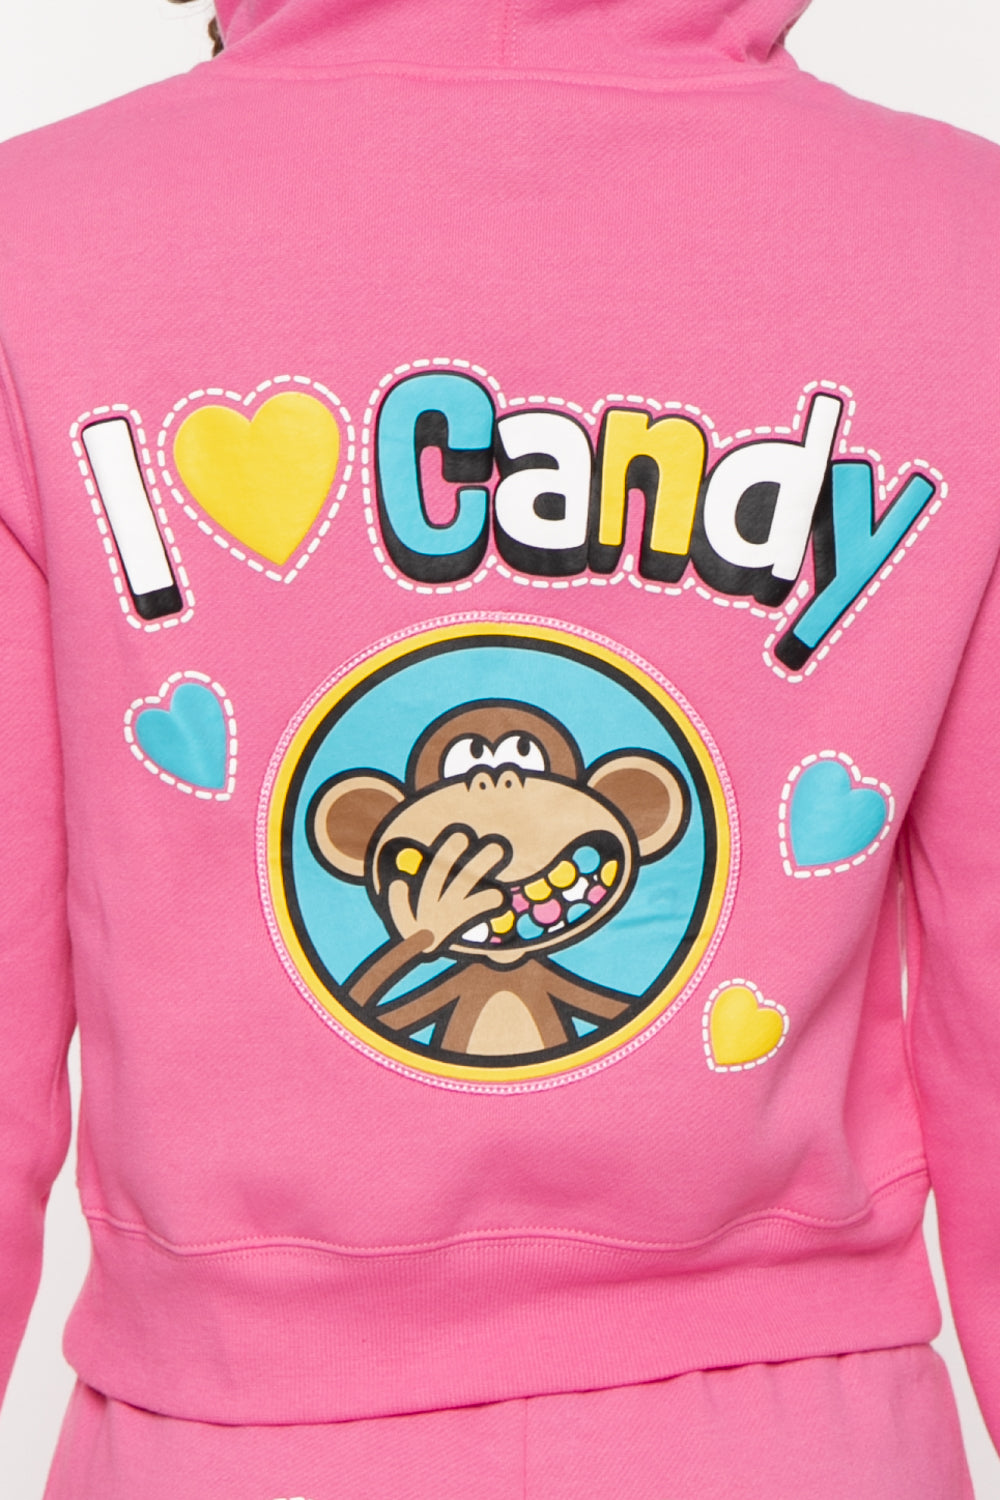 Bobby Jack 2PC Zip Up Hoodie Set - I Love Candy- Pink